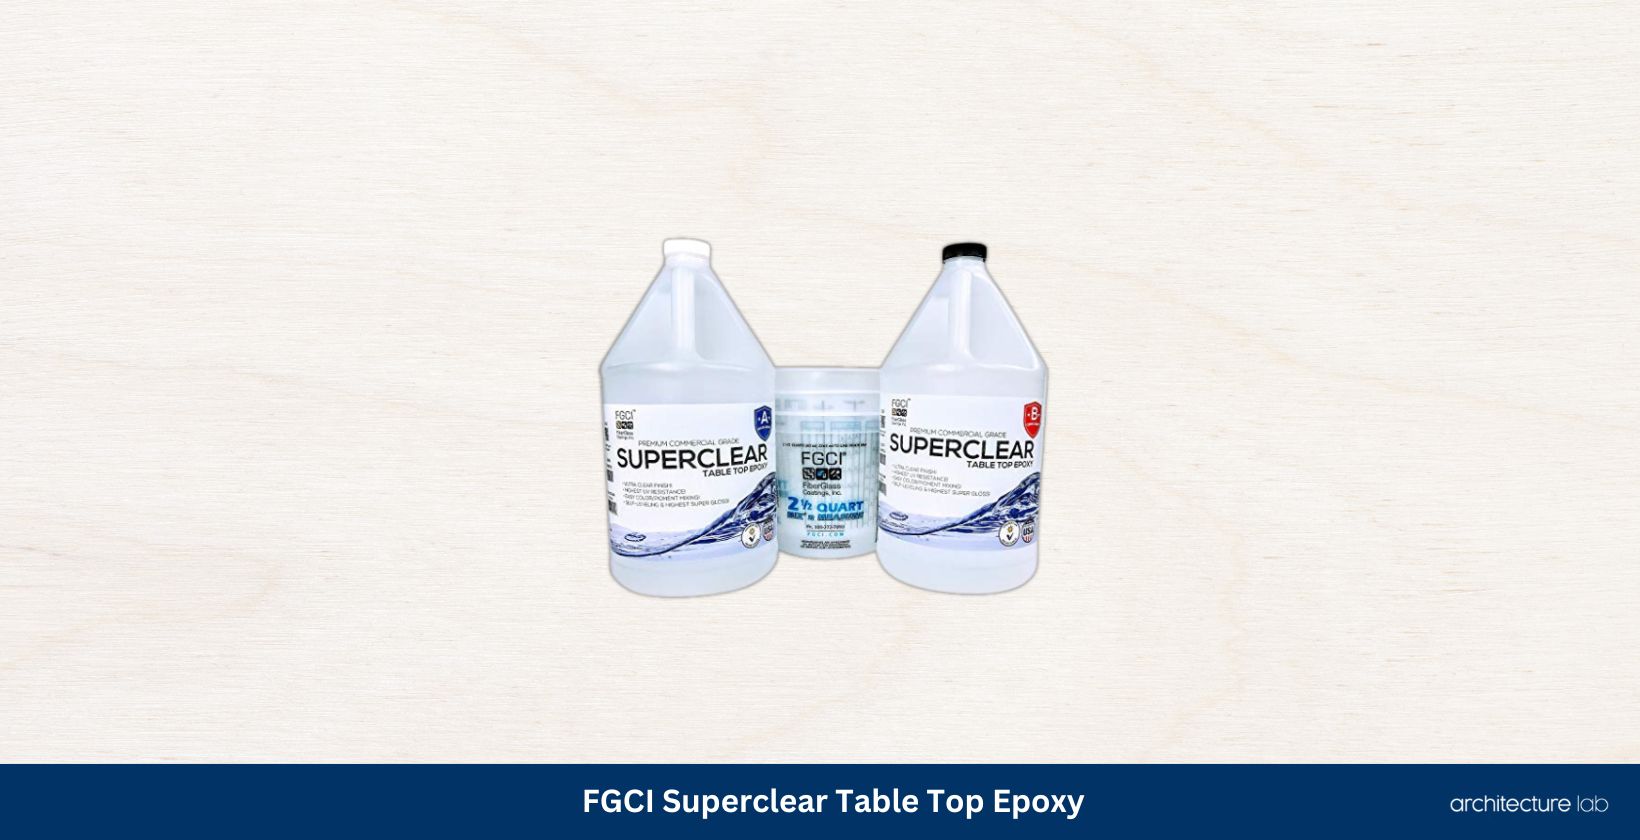 Fgci superclear table top